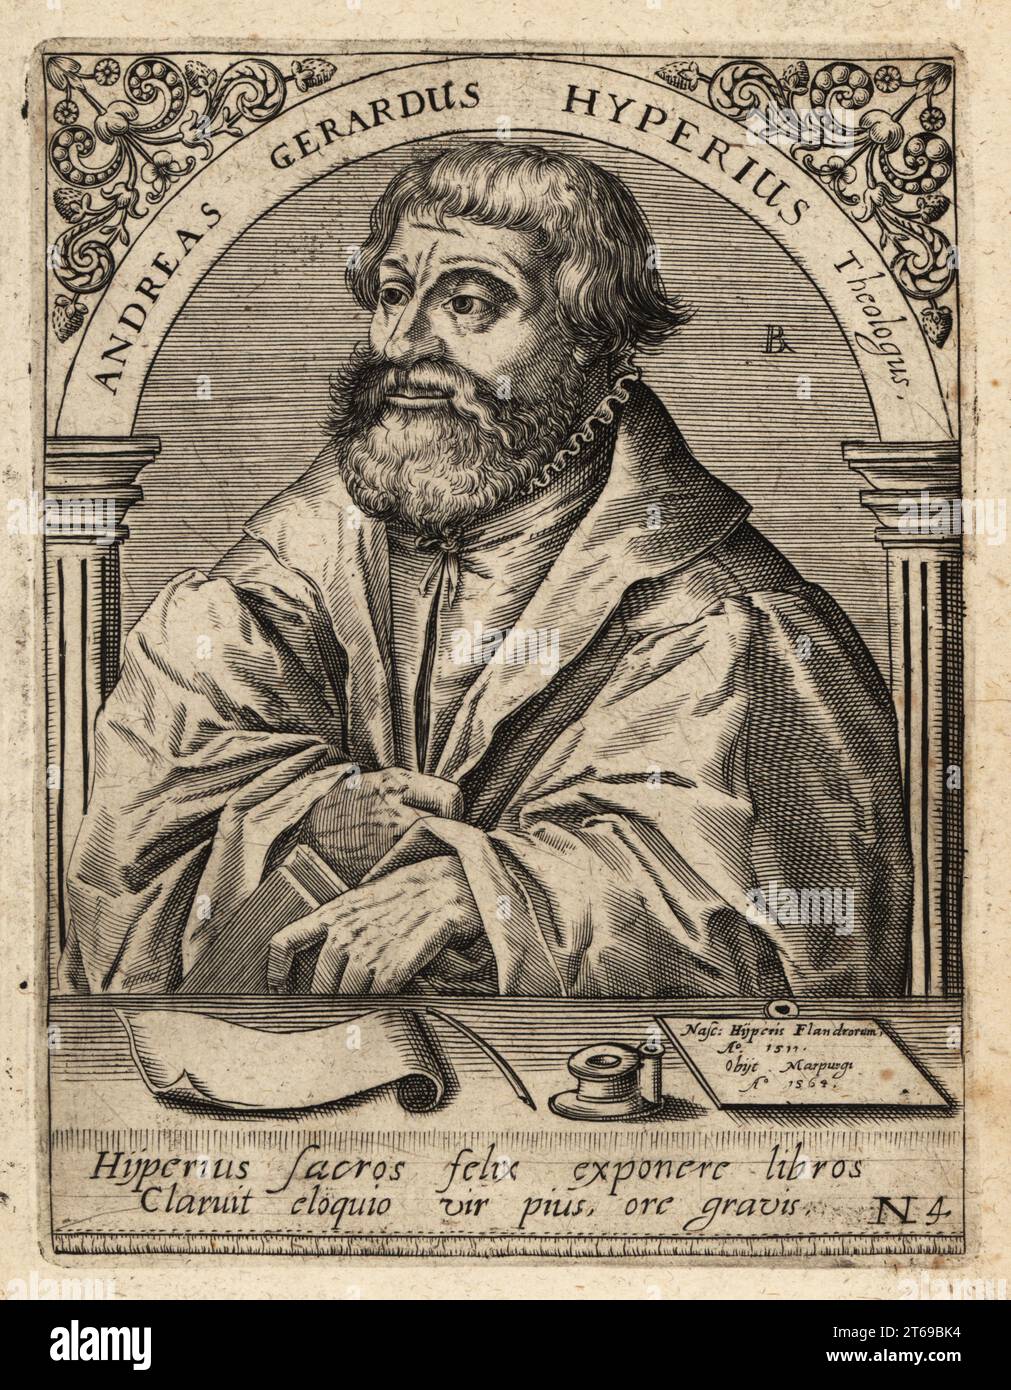 Andreas Gerhard Hyperius, 15111564, Protestant theologian and reformer. Andreas Gerardus Hyperius Theologus. Copperplate engraving by Johann Theodore de Bry from Jean-Jacques Boissards Bibliotheca Chalcographica, Johann Ammonius, Frankfurt, 1650. Stock Photo